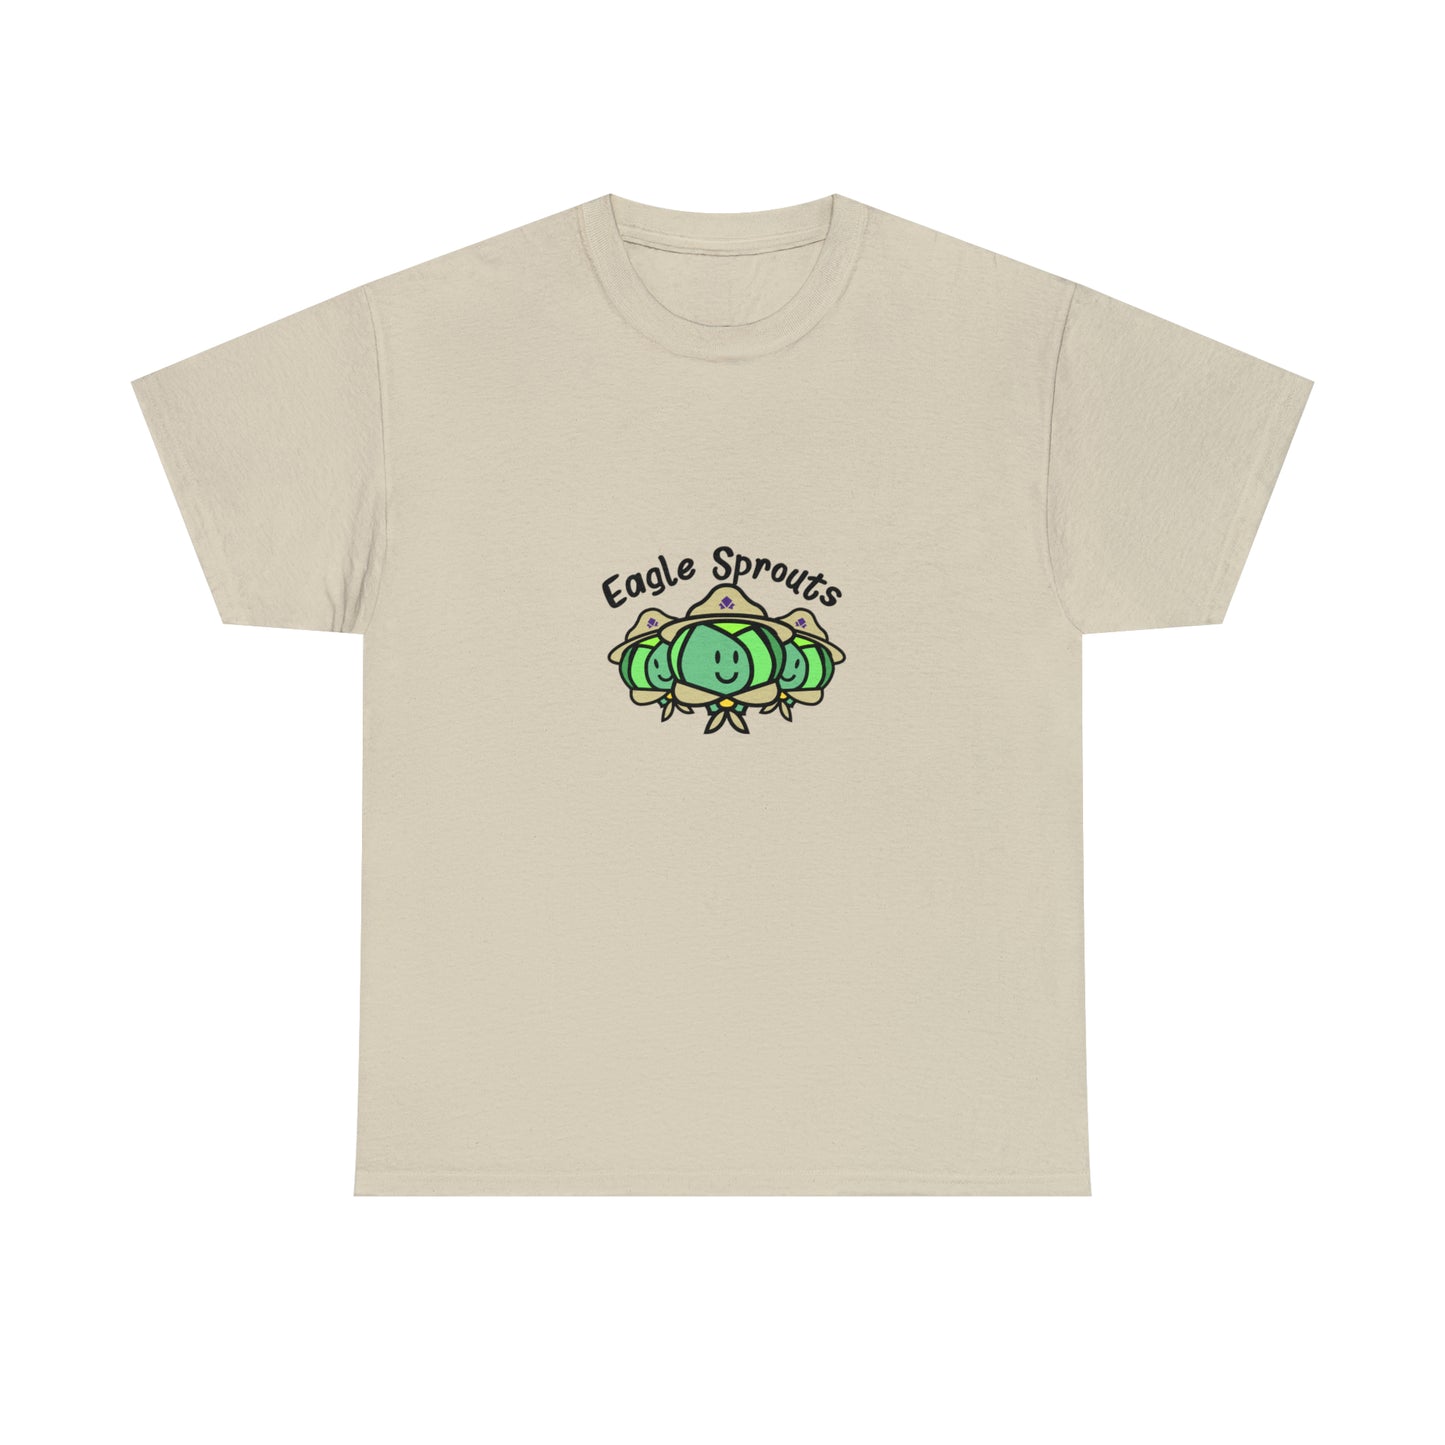 Custom Parody T-shirt, Eagle Sprouts (Brussel Sprouts) design